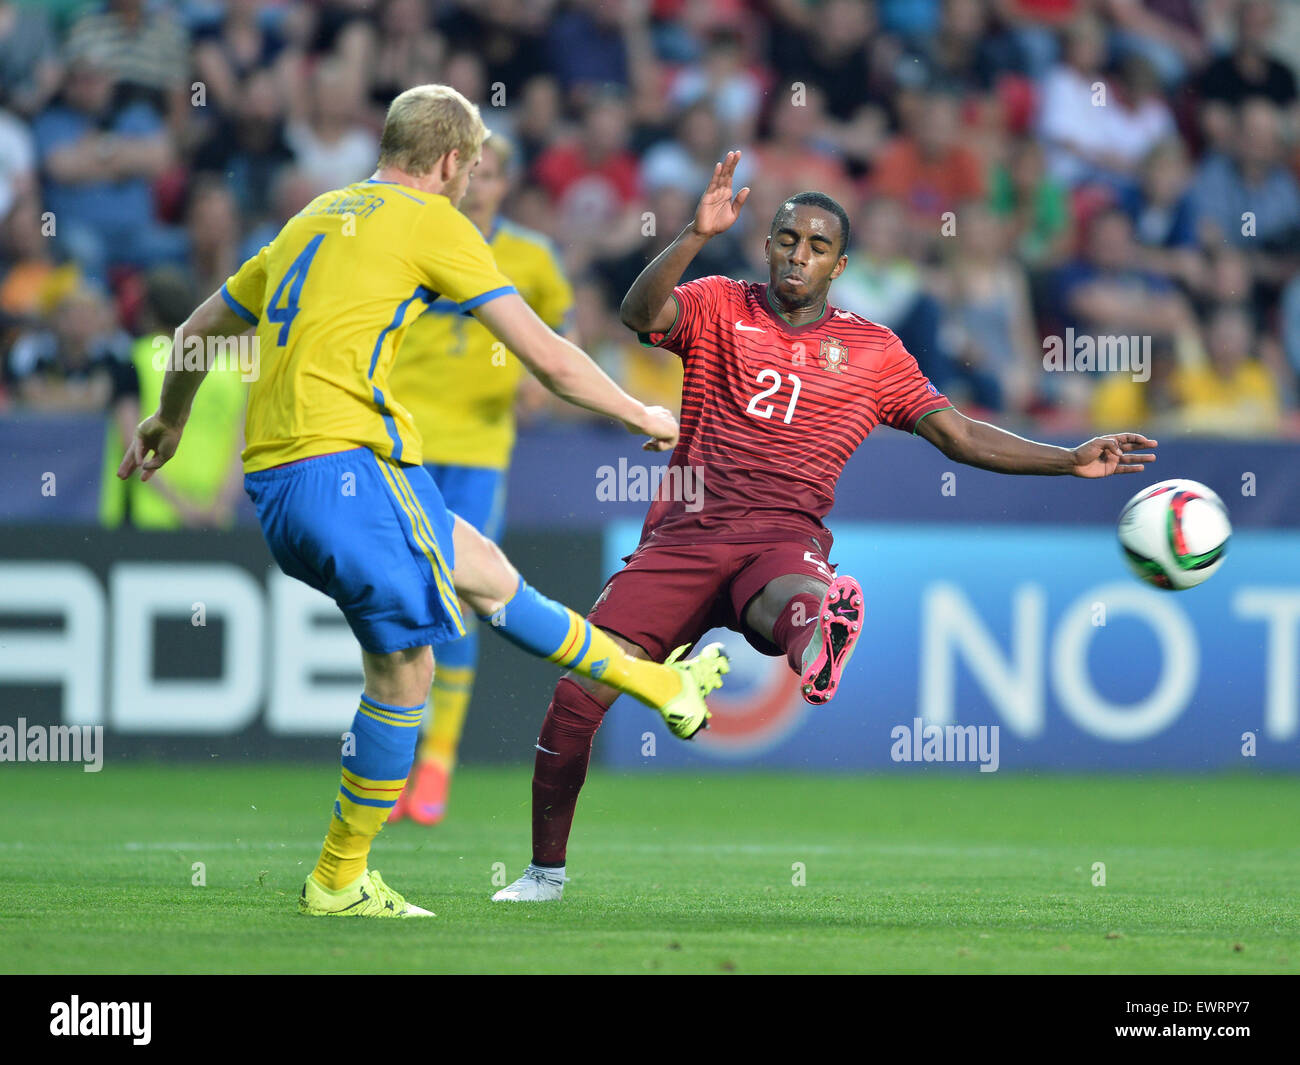 Prague, Czech Republic. 30th June, 2015. Filip Helander of Sweden (left) and Ricardo of Portugal in action during the Euro U21 soccer championship final match Portugal vs Sweden in Prague, Czech Republic, June 30, 2015. © Katerina Sulova/CTK Photo/Alamy Live News Stock Photo